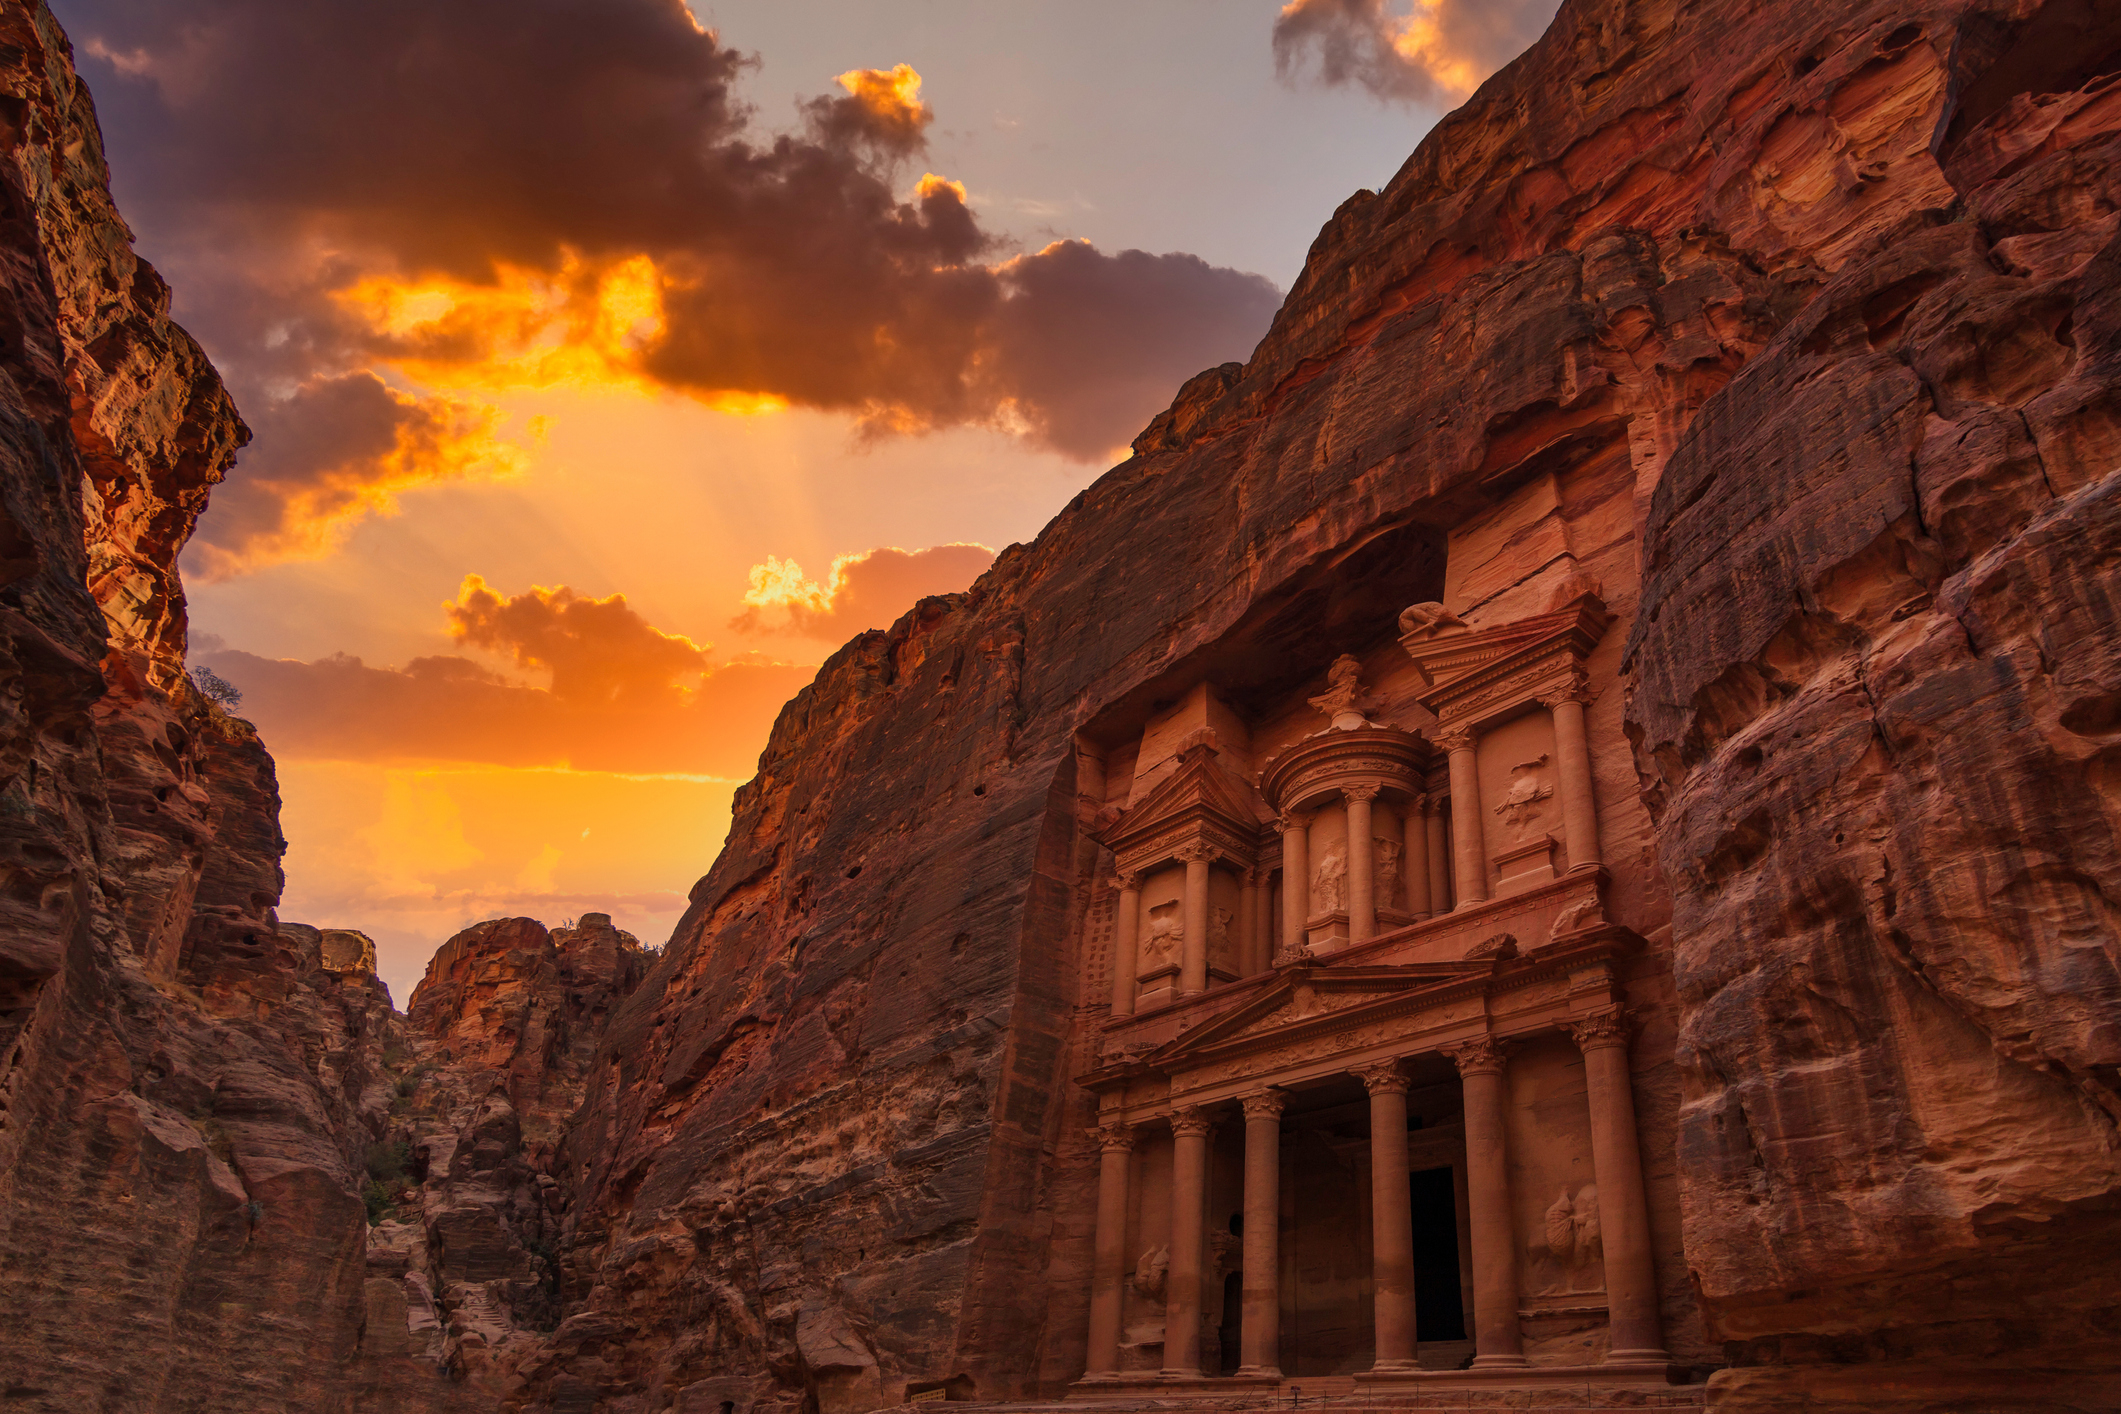 Petra archaeological site